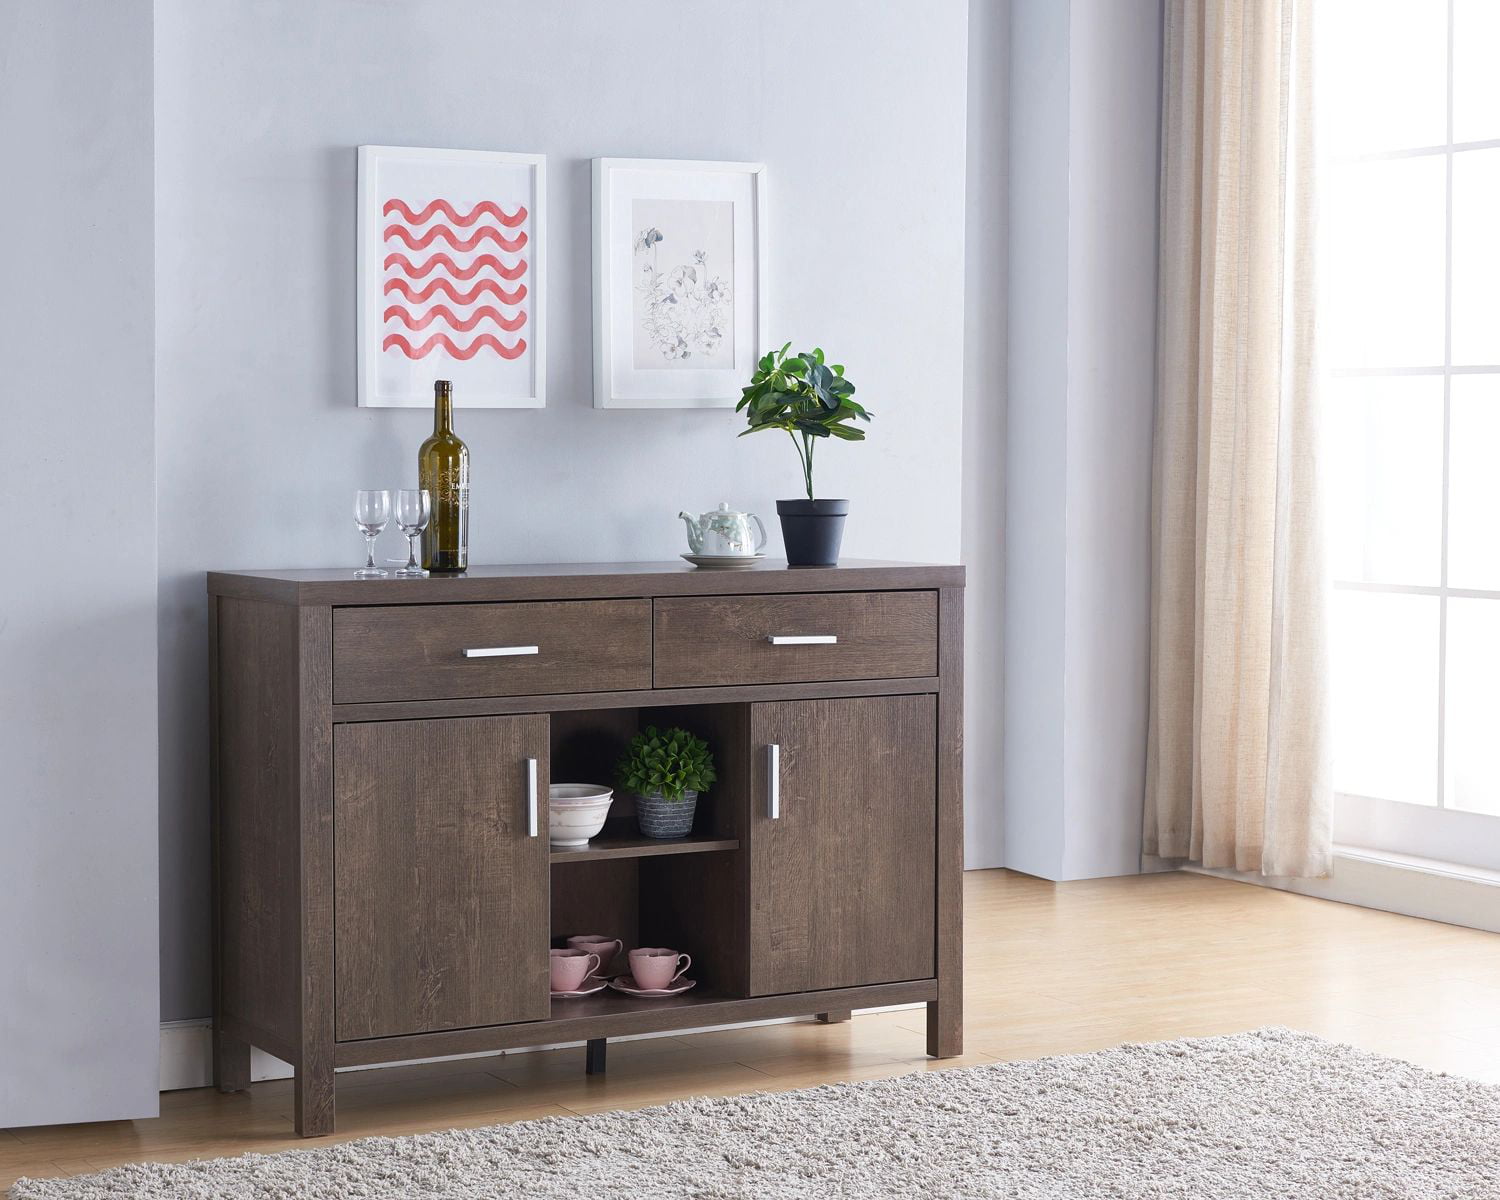 FC Design 62 W Freestanding Buffet Table Sideboard with Two Storage Cabinet in Distressed Grey Finish